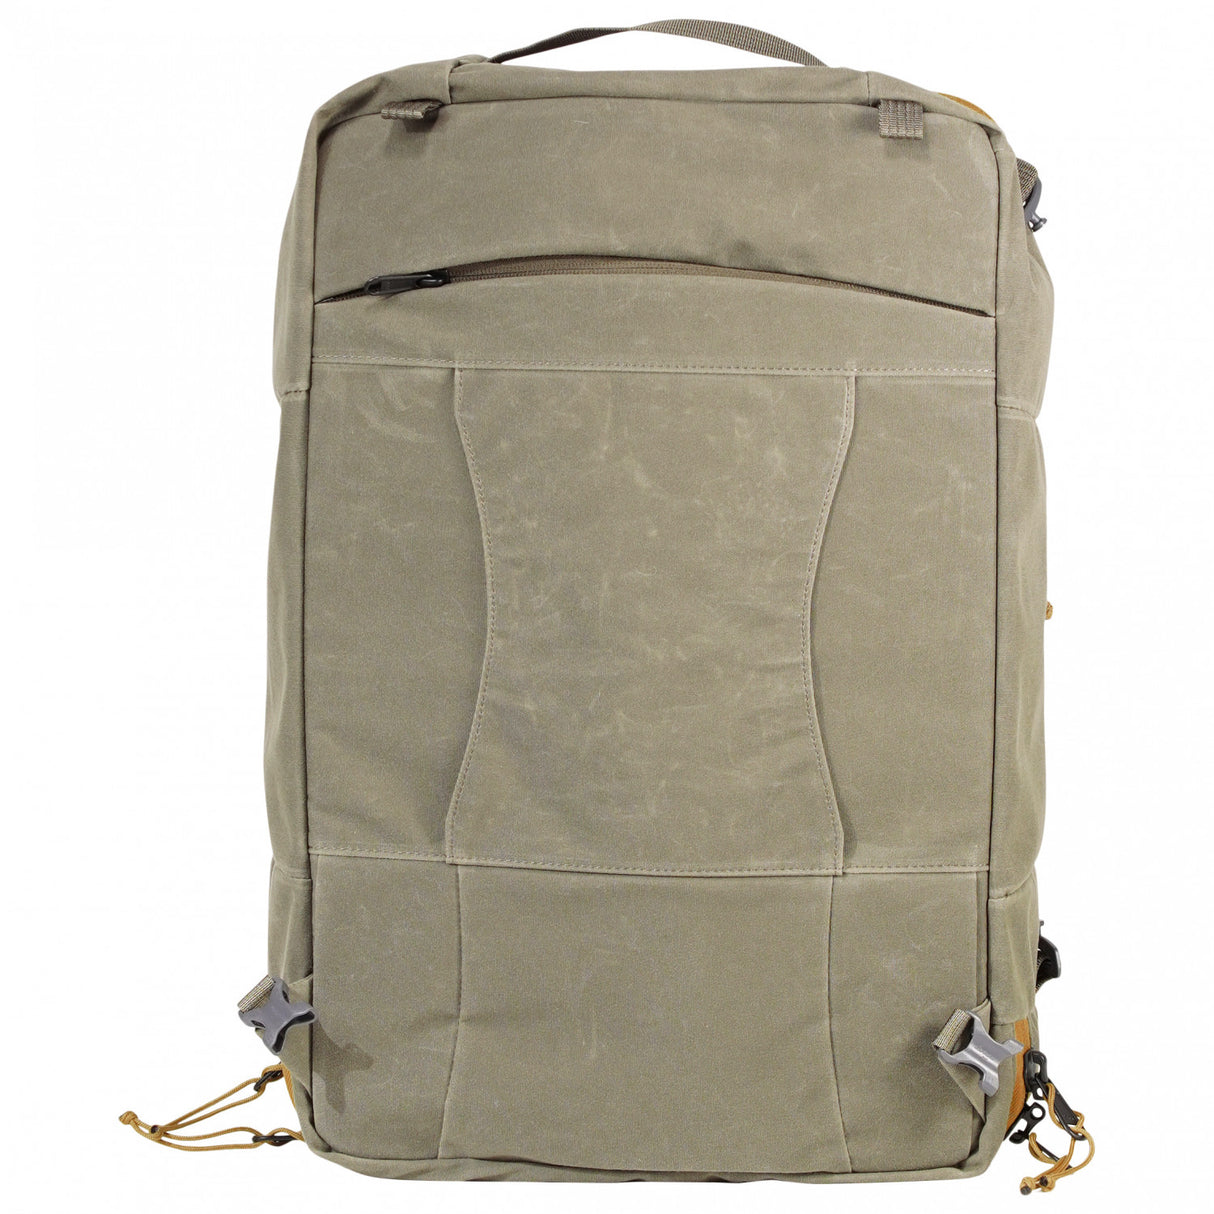 Mystery Ranch Unisex Mission Rover 30 Backpack - One Size - Sportandleisure.com